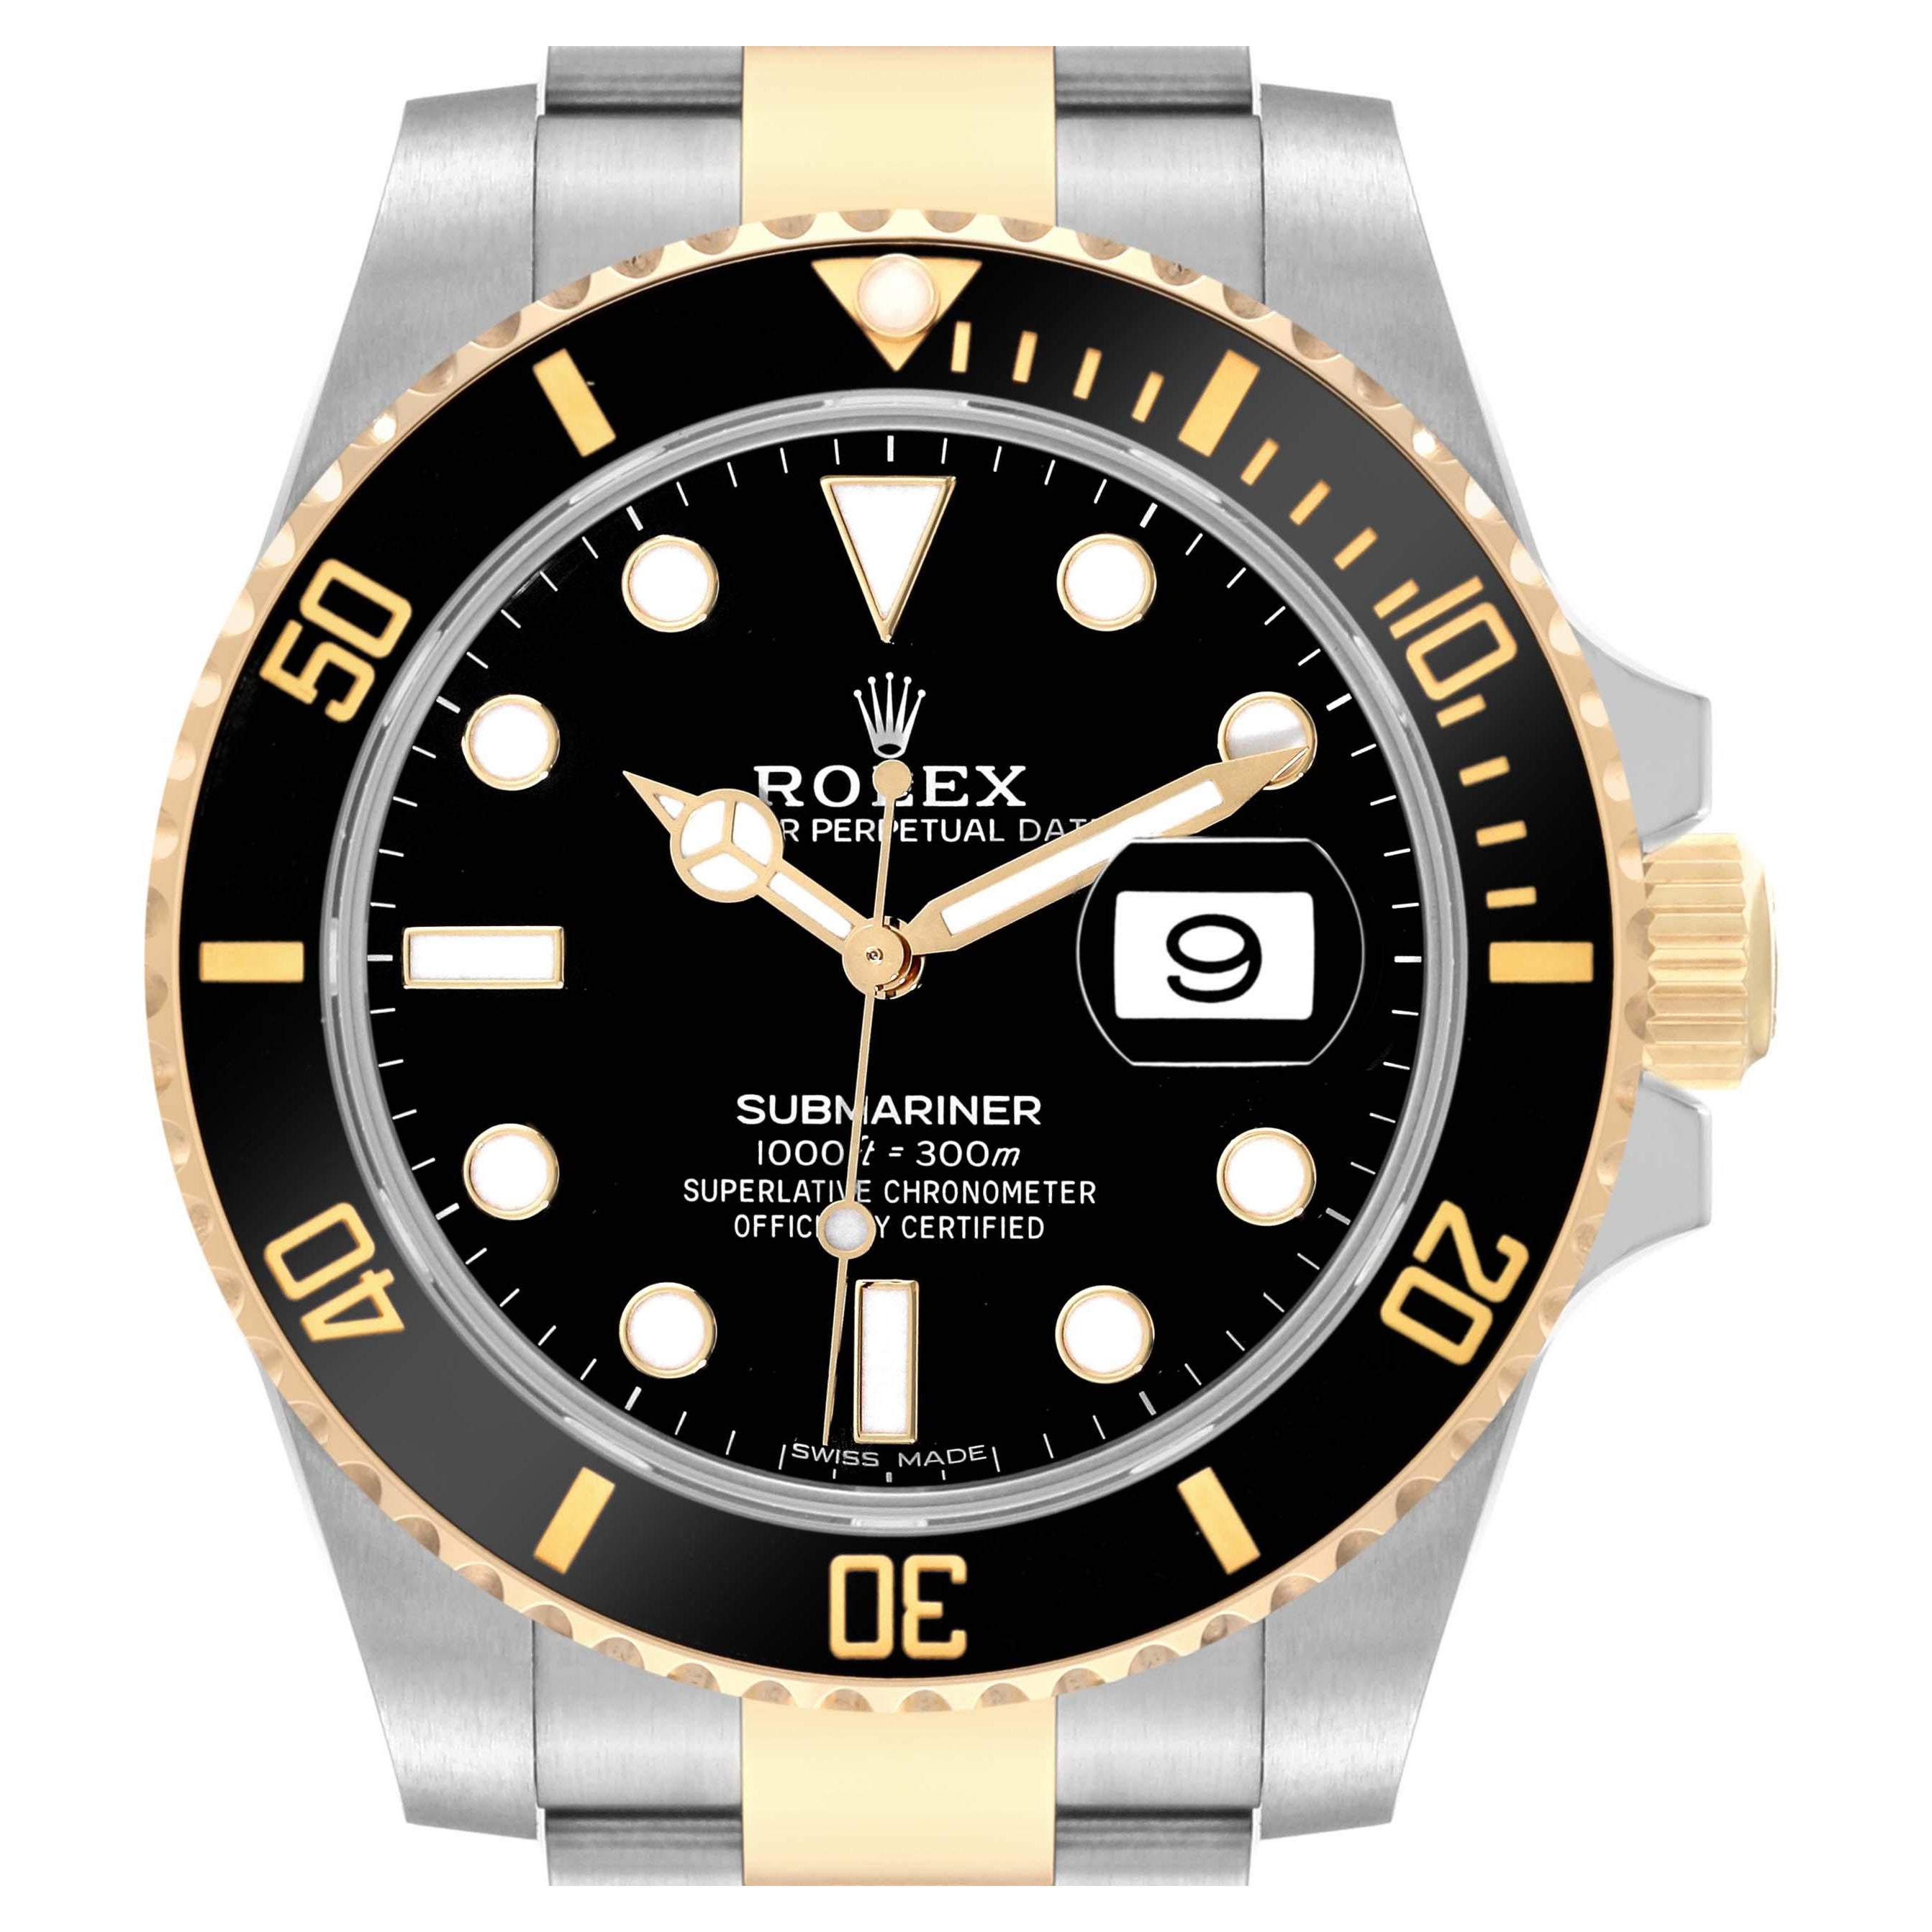 Rolex Submariner Steel Yellow Gold Black Dial Mens Watch 116613 Box Card